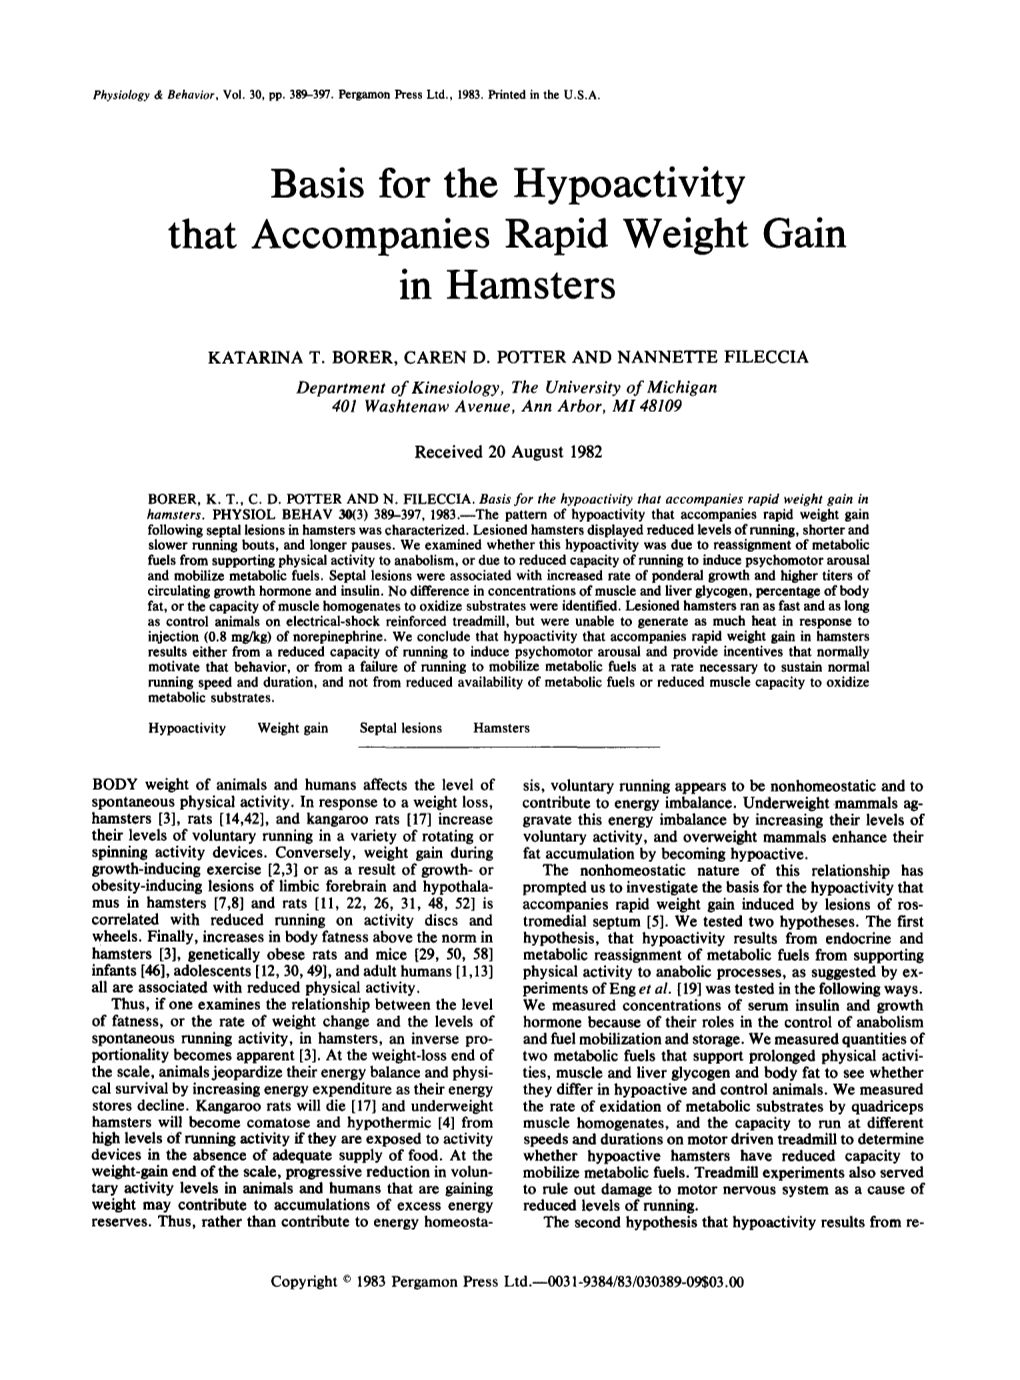 Basis for the Hypoactivity That Accompanies Rapid Weight Gain in Hamsters